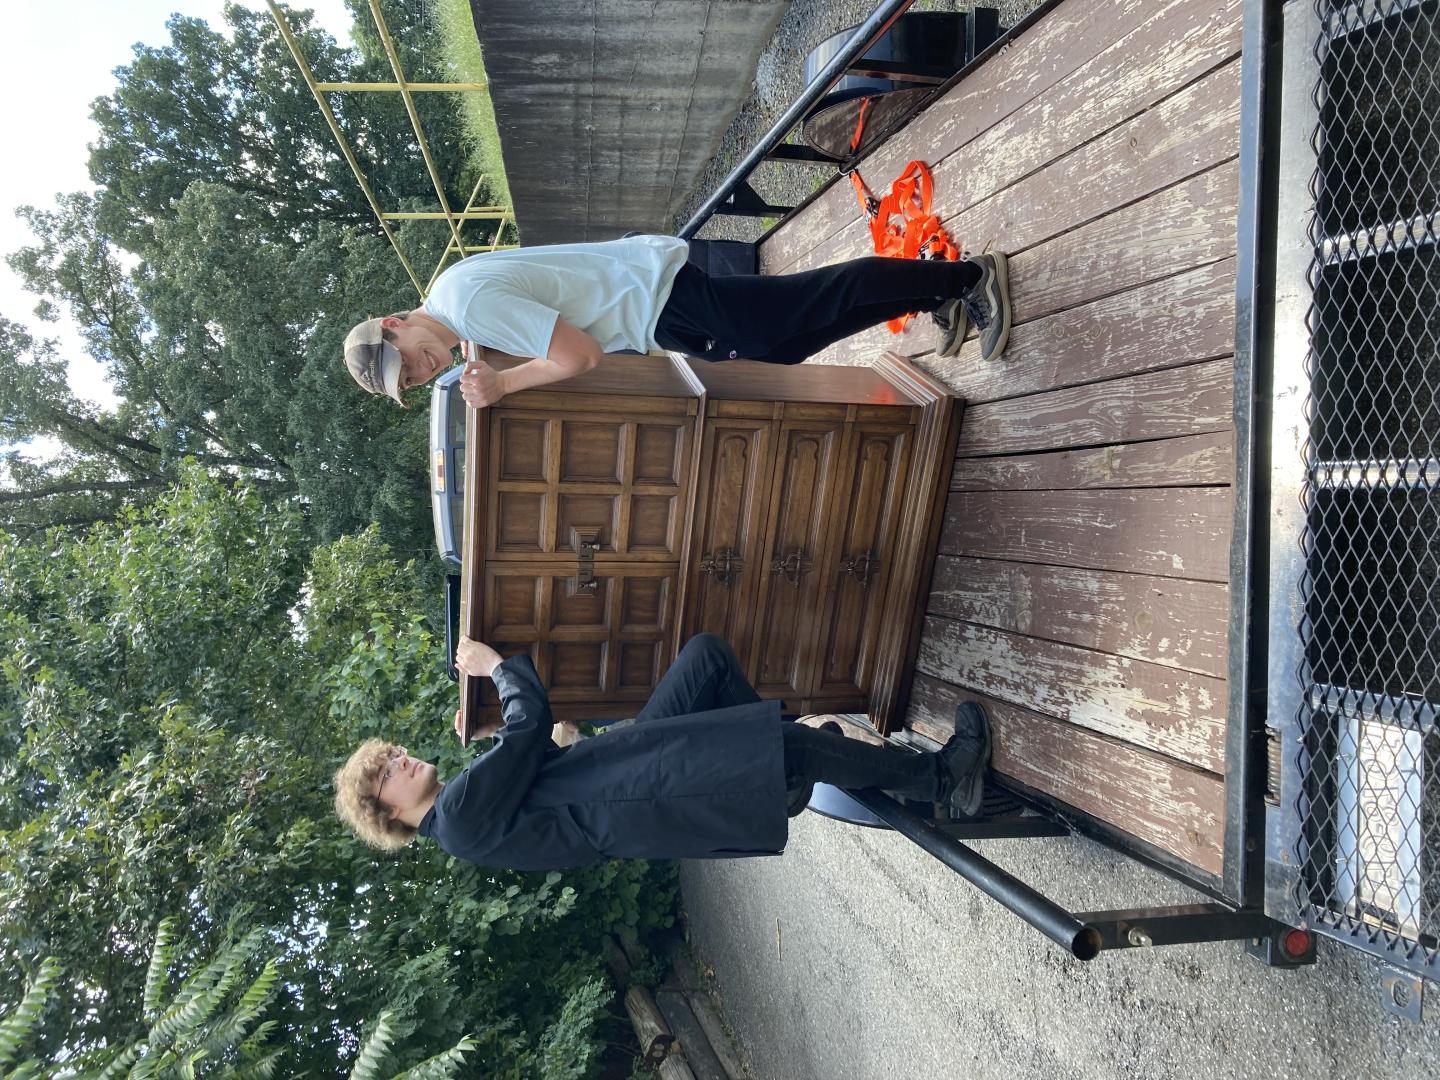 Two young men unloading a dresser from a utility trailer.